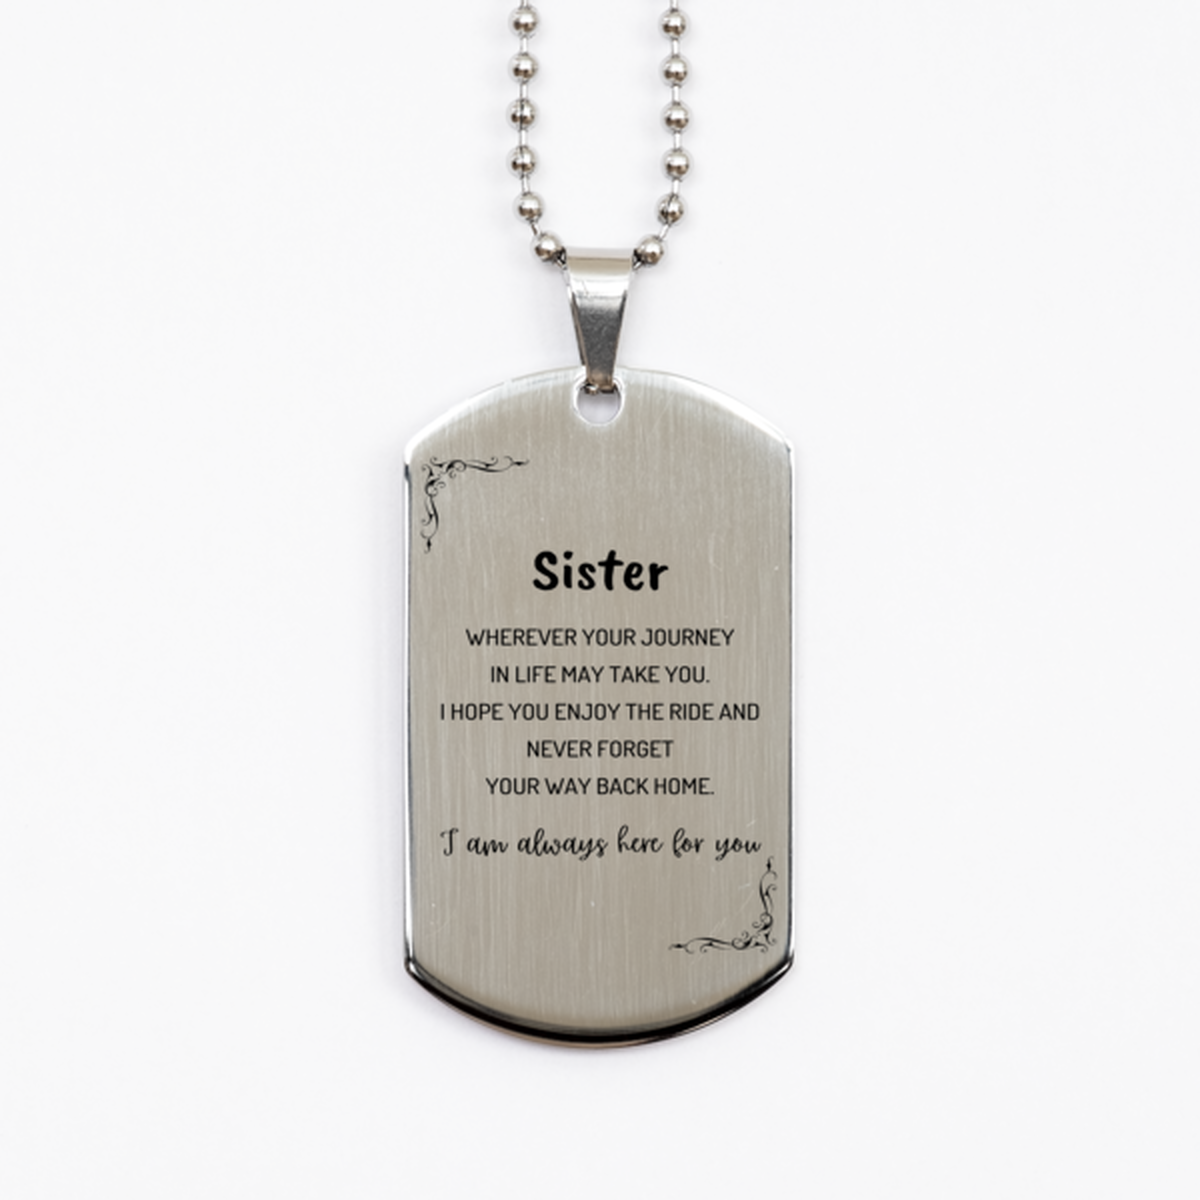 Sister wherever your journey in life may take you, I am always here for you Sister Silver Dog Tag, Awesome Christmas Gifts For Sister, Sister Birthday Gifts for Men Women Family Loved One